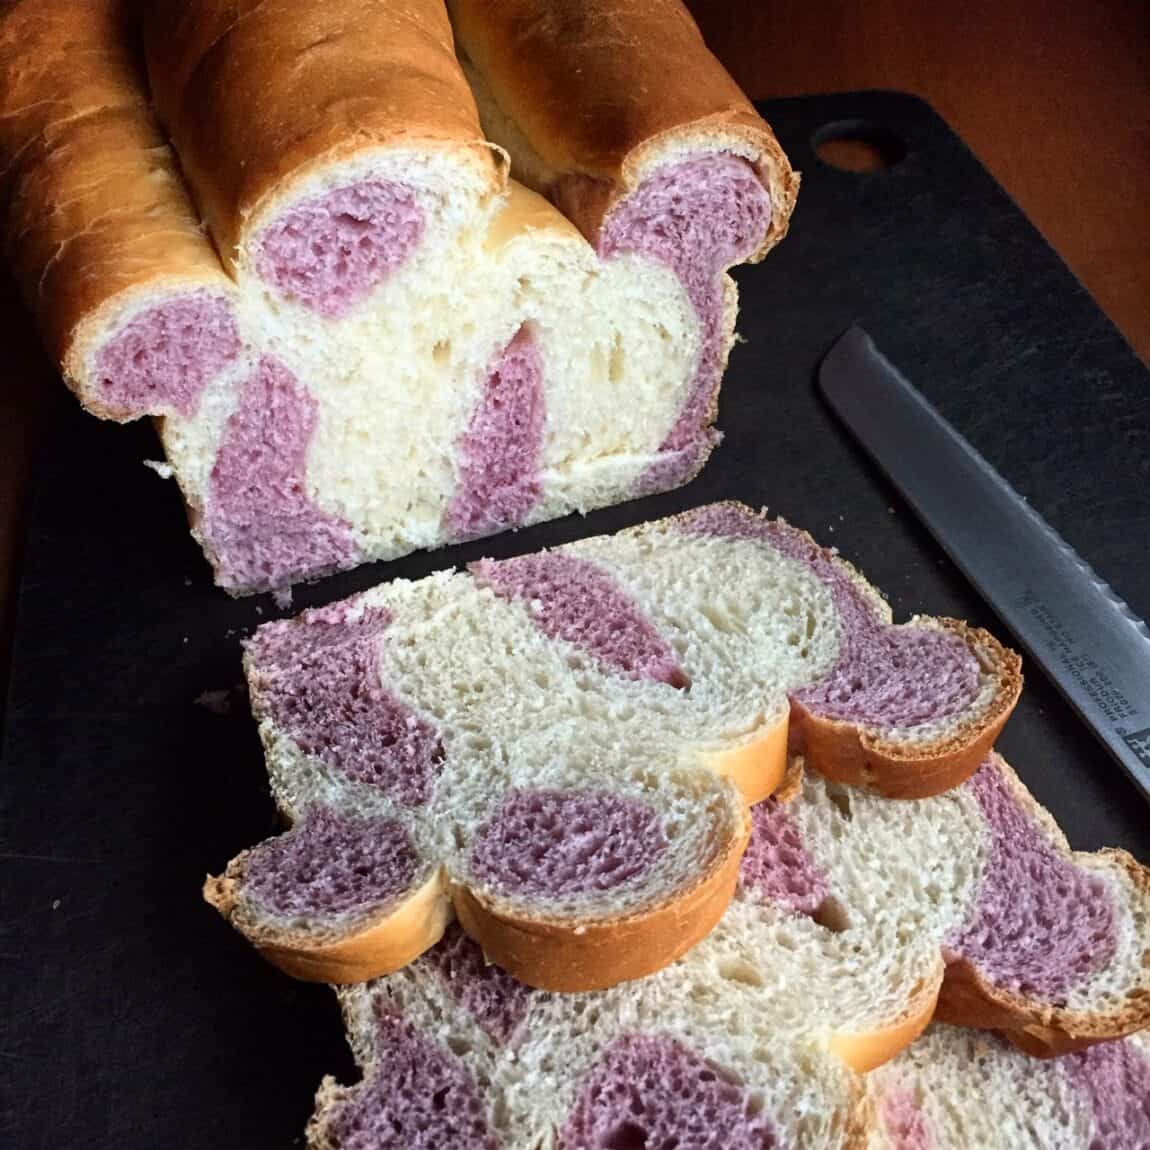 funny shaped bread with white and a mauve colored dough.